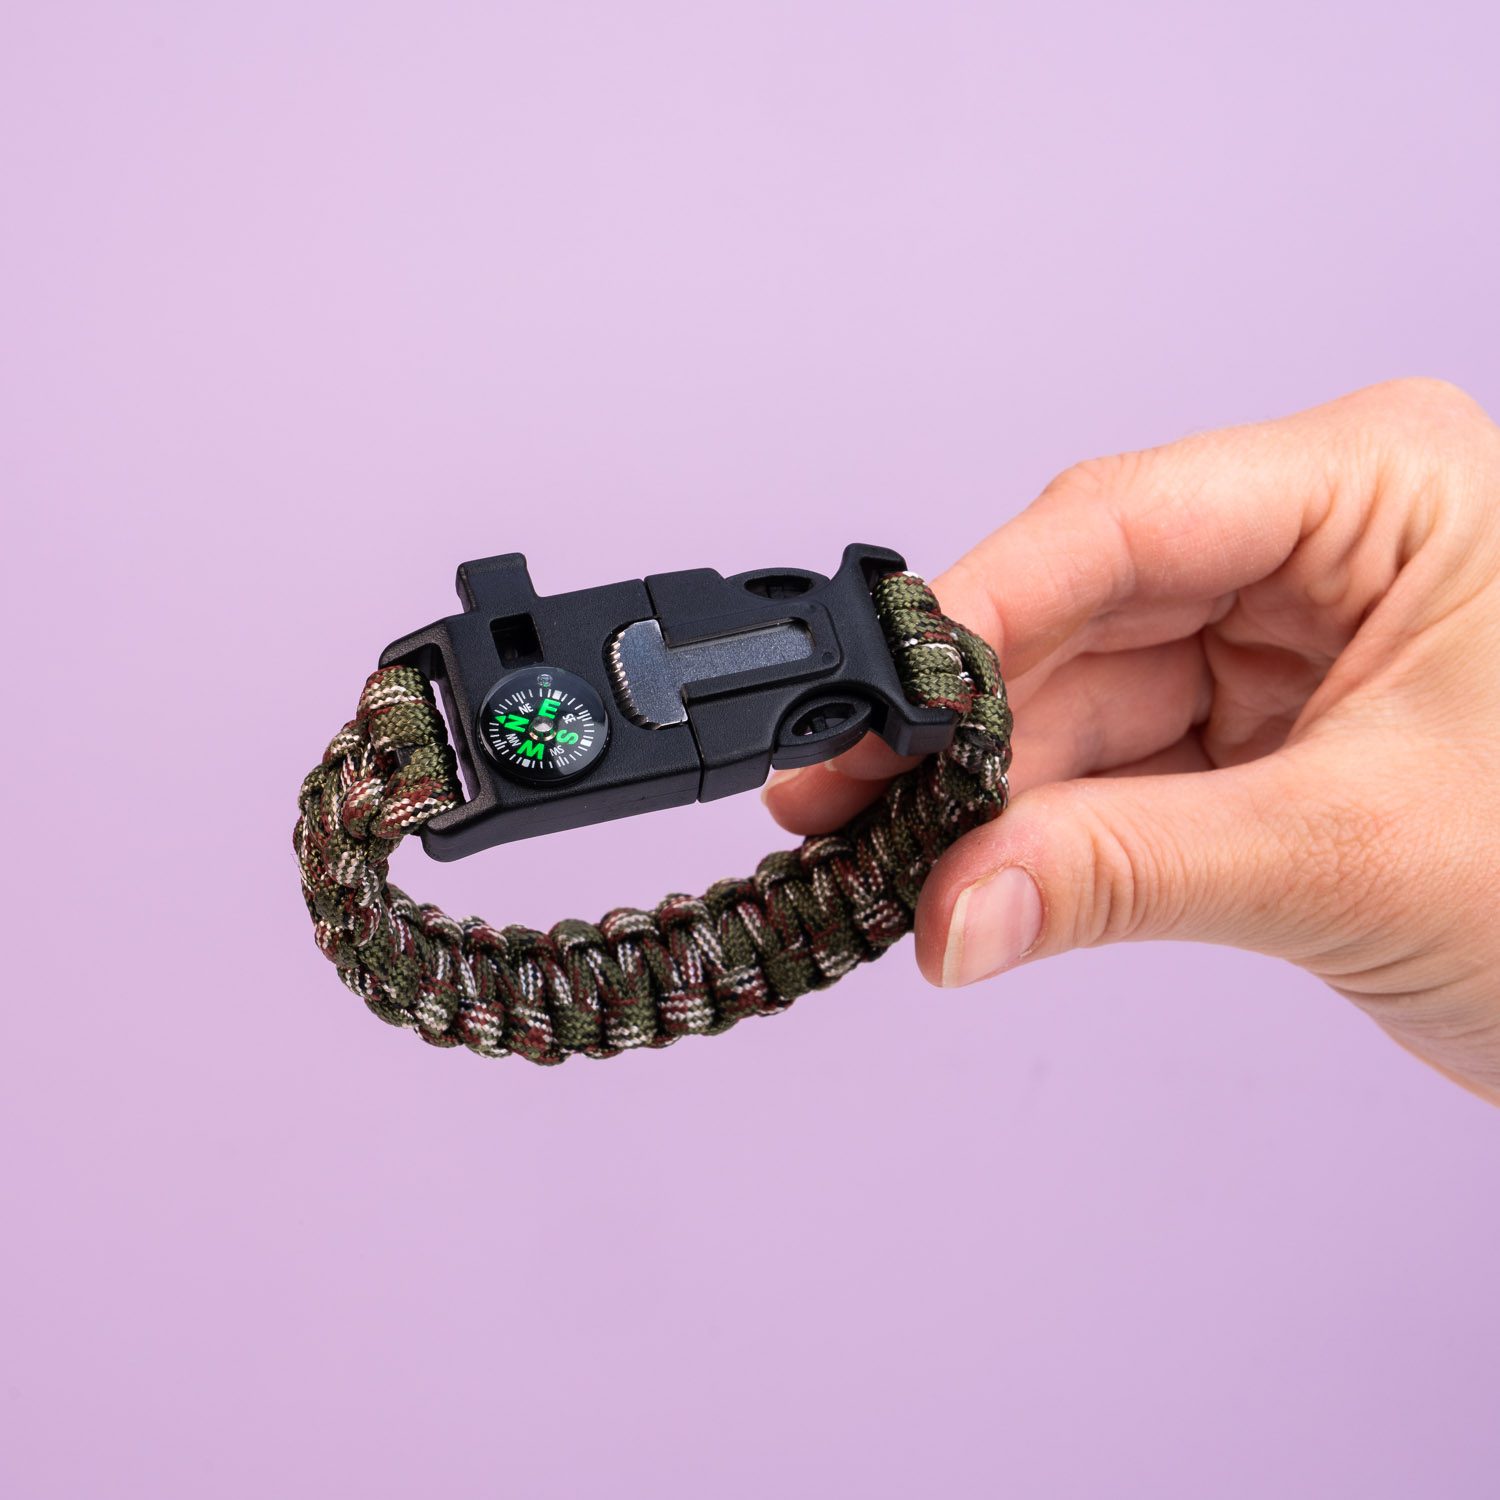 Paracord 5 in 1 survival armband